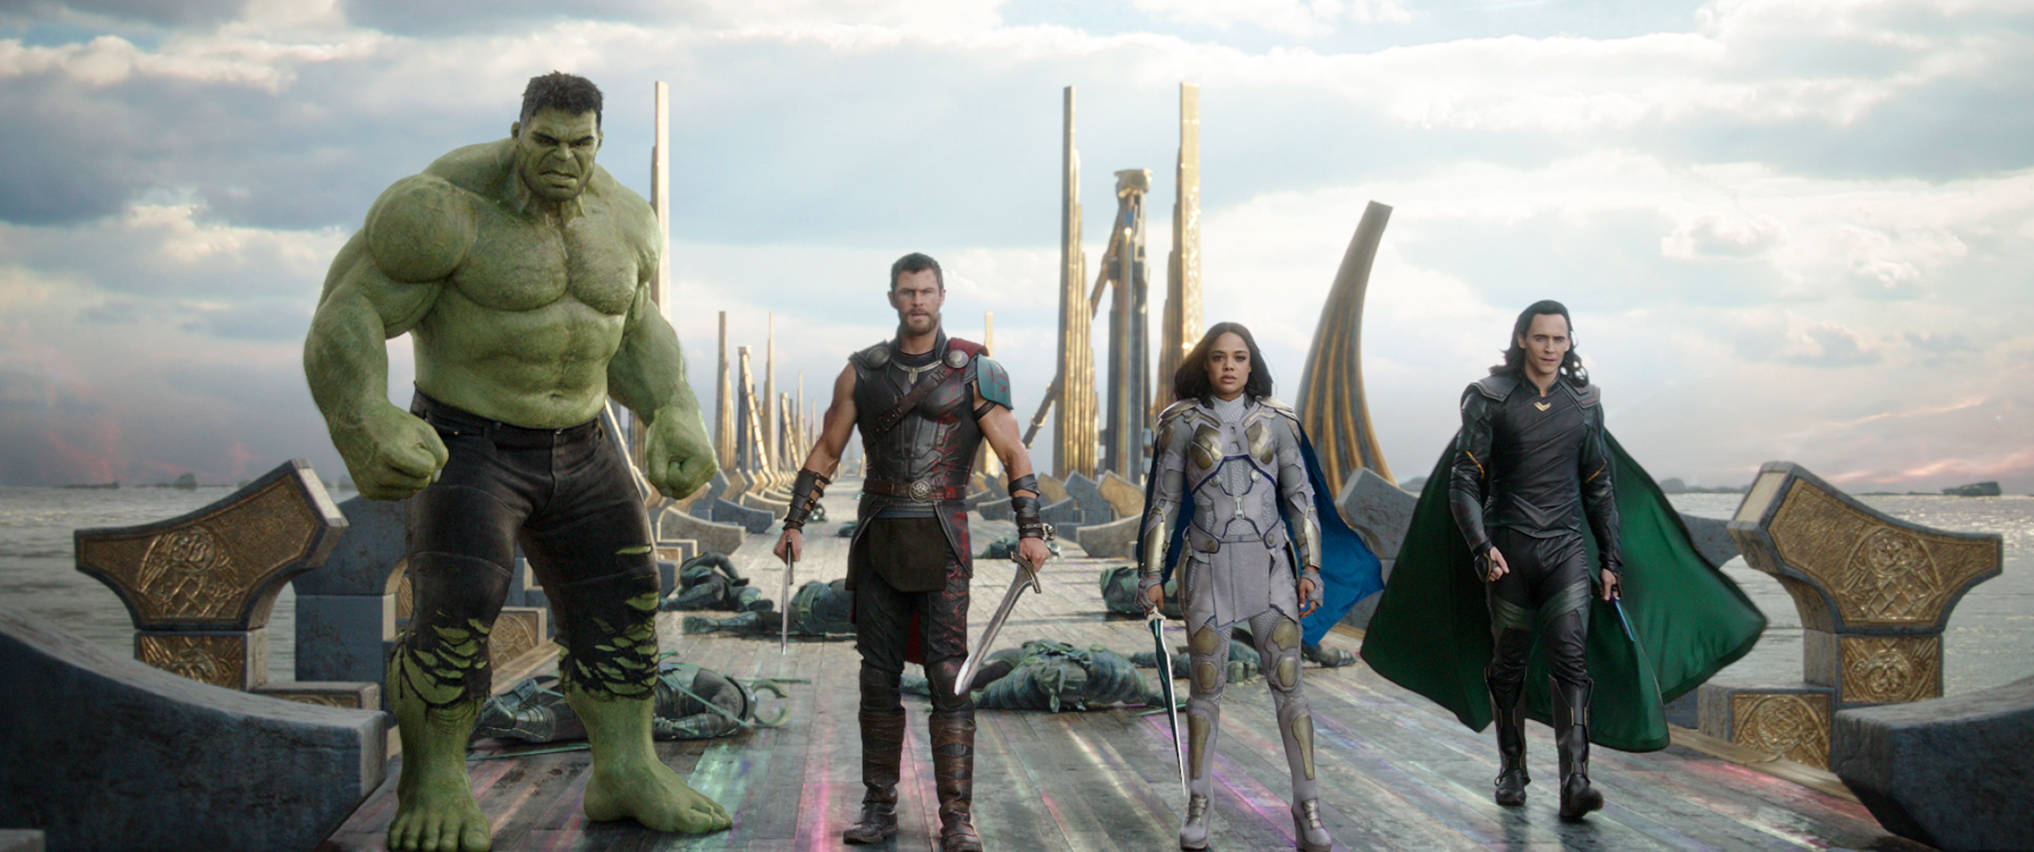 This image released by Marvel Studios shows the Hulk, from left, Chris Hemsworth as Thor, Tessa Thompson as Valkyrie and Tom Hiddleston as Loki in a scene from, “Thor: Ragnarok.” (Marvel Studios via AP)